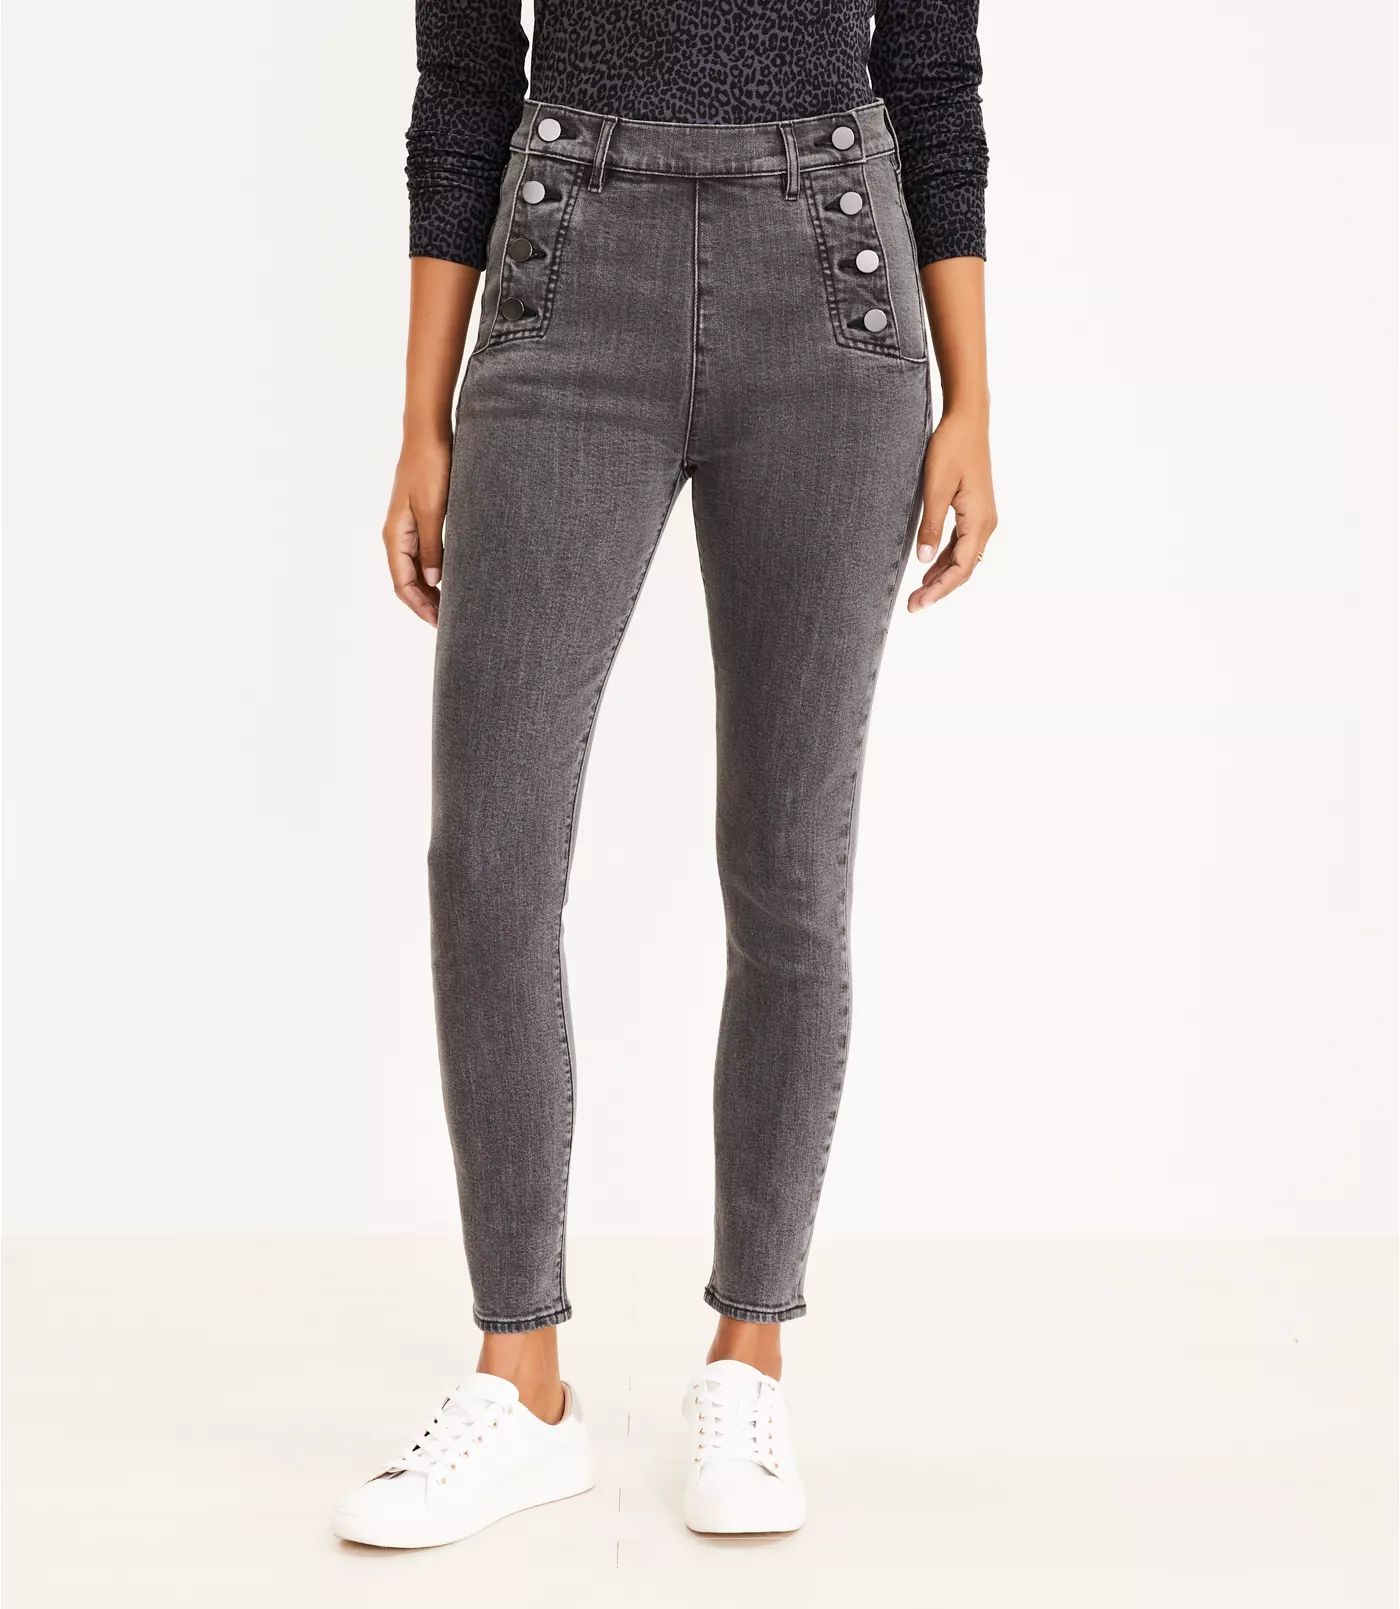 Admiral High Rise Skinny Jeans in Staple Grey Wash | LOFT